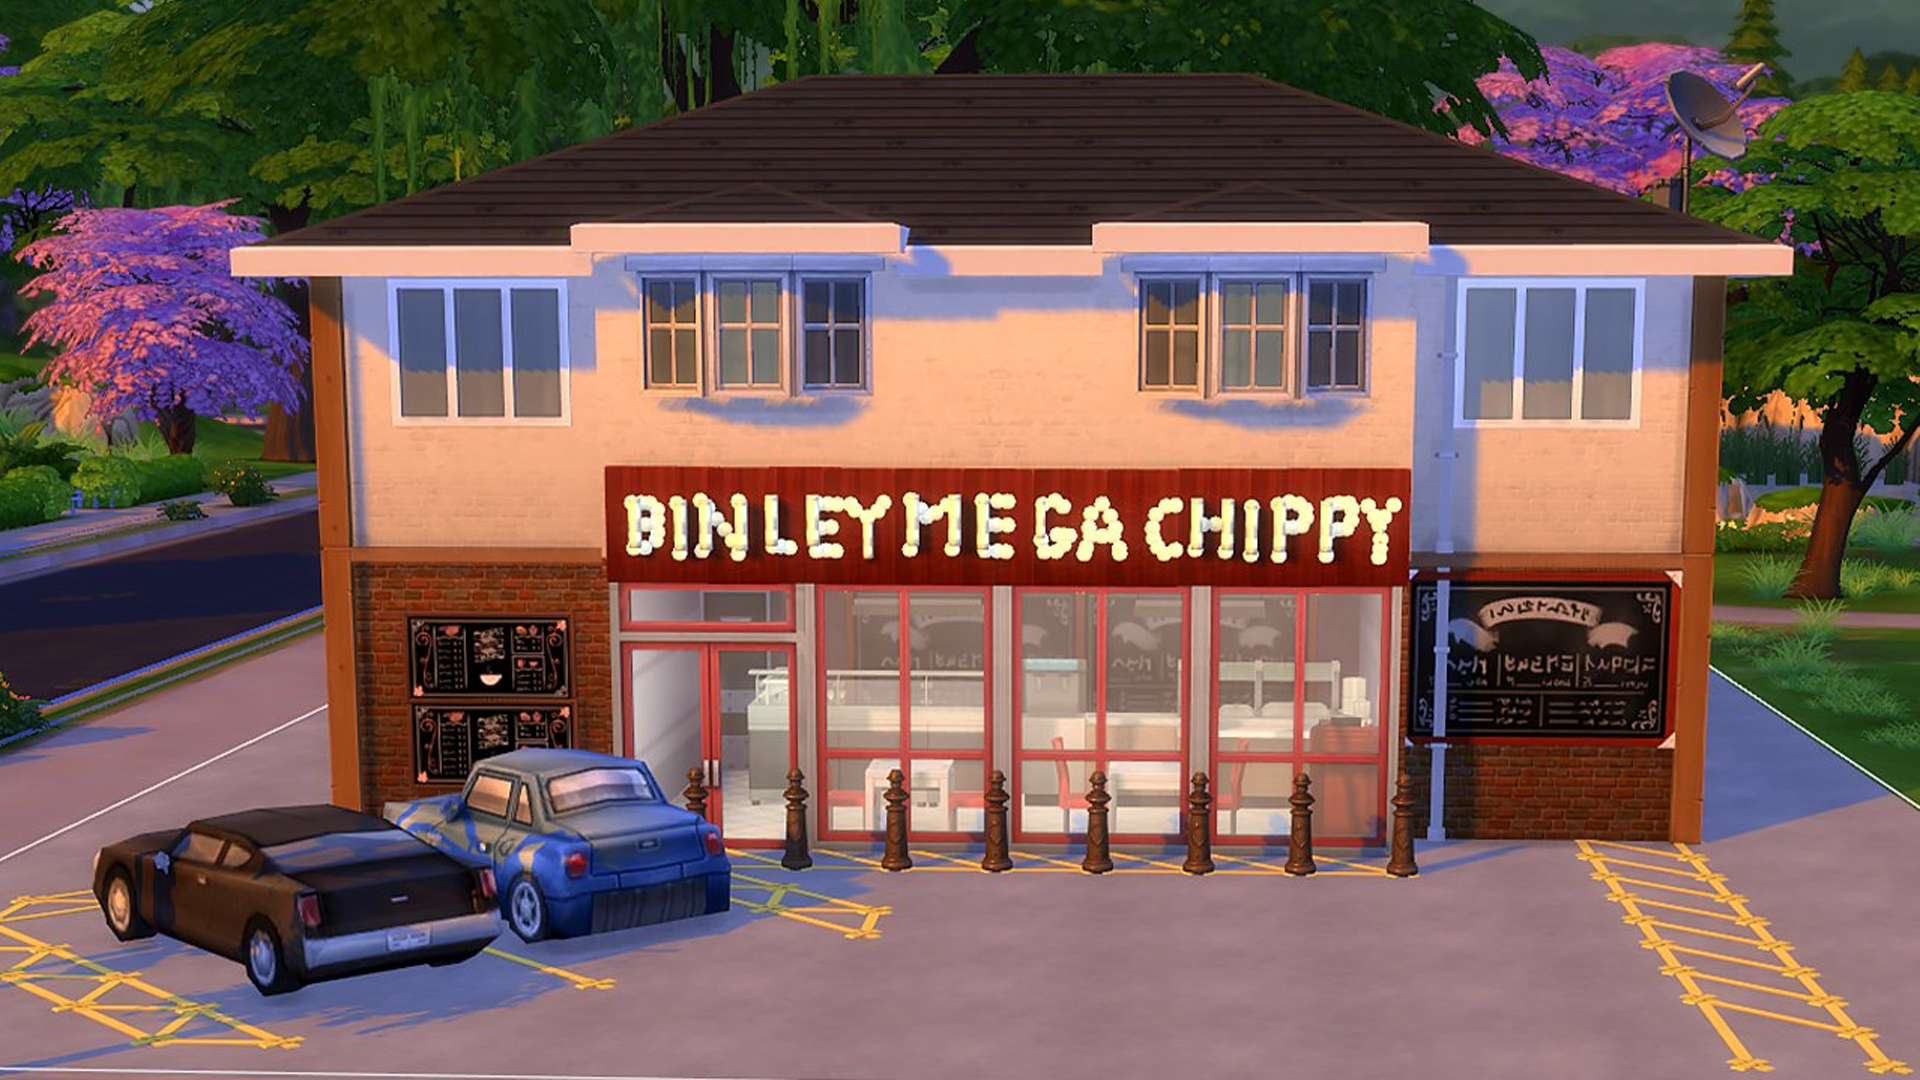 This Sims 4 build is a working Binley Mega Chippy